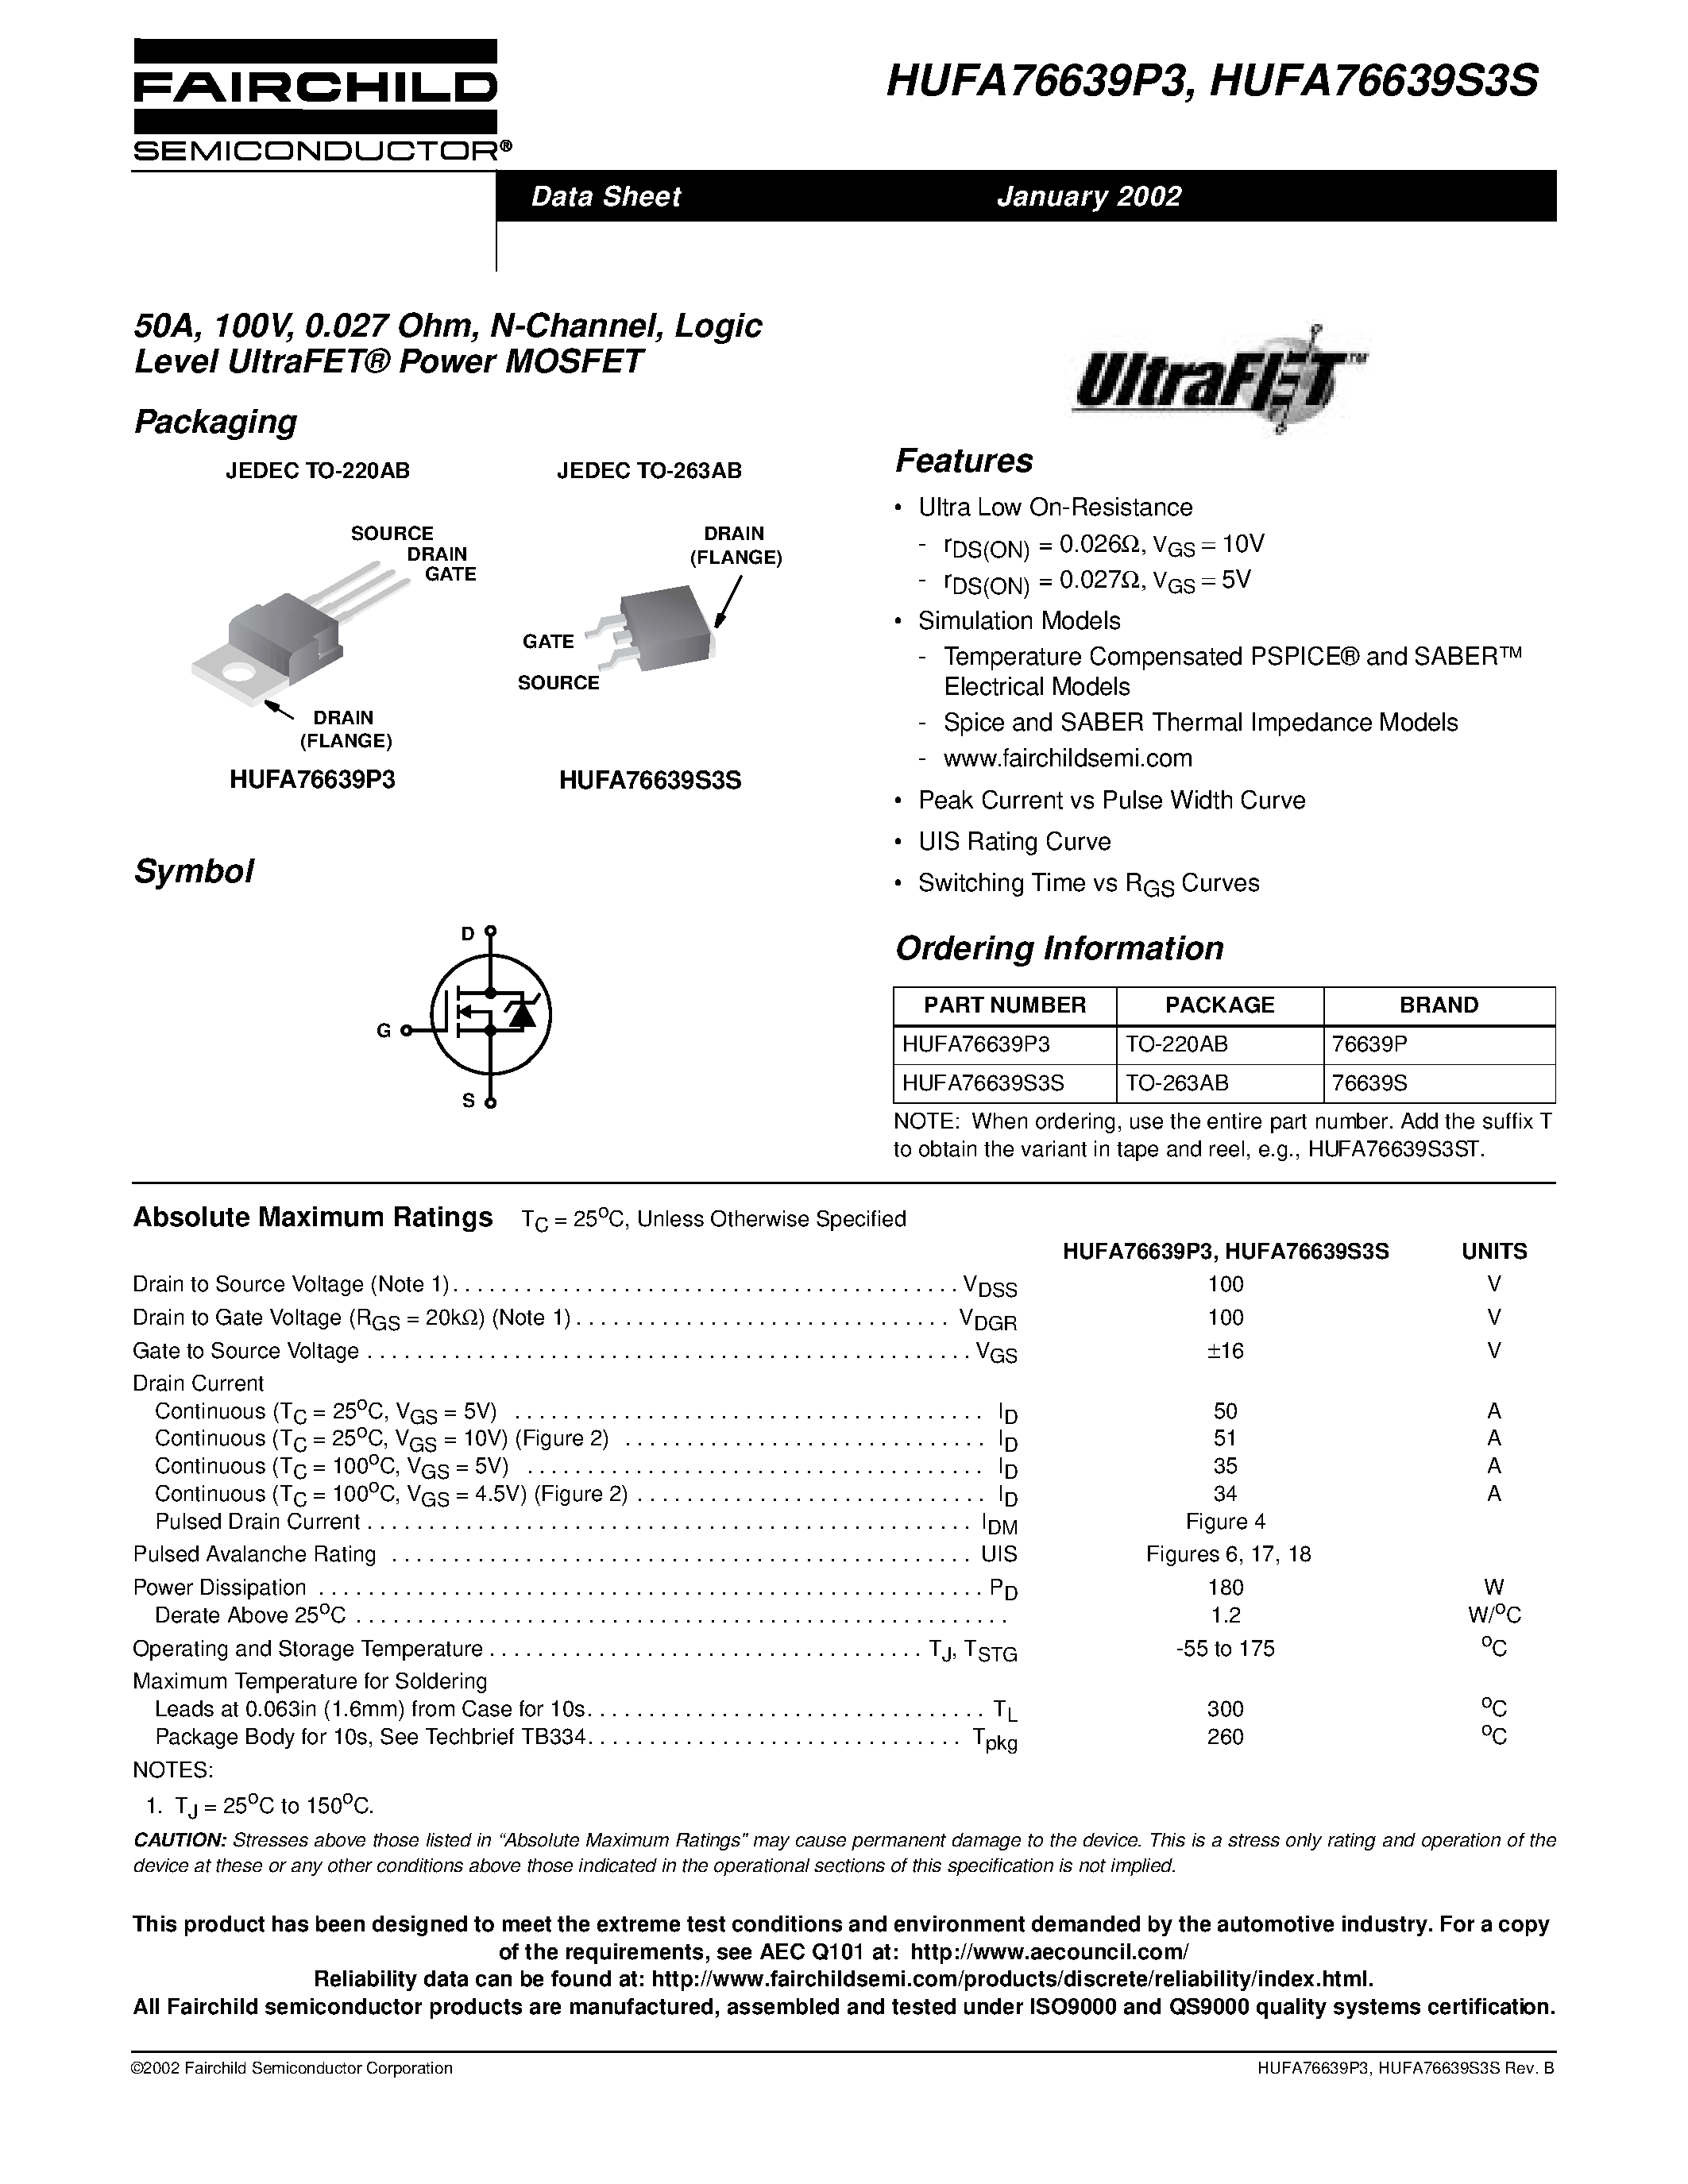 Datasheet HUFA76639S3S - 50A/ 100V/ 0.027 Ohm/ N-Channel/ Logic Level UltraFET Power MOSFET page 1